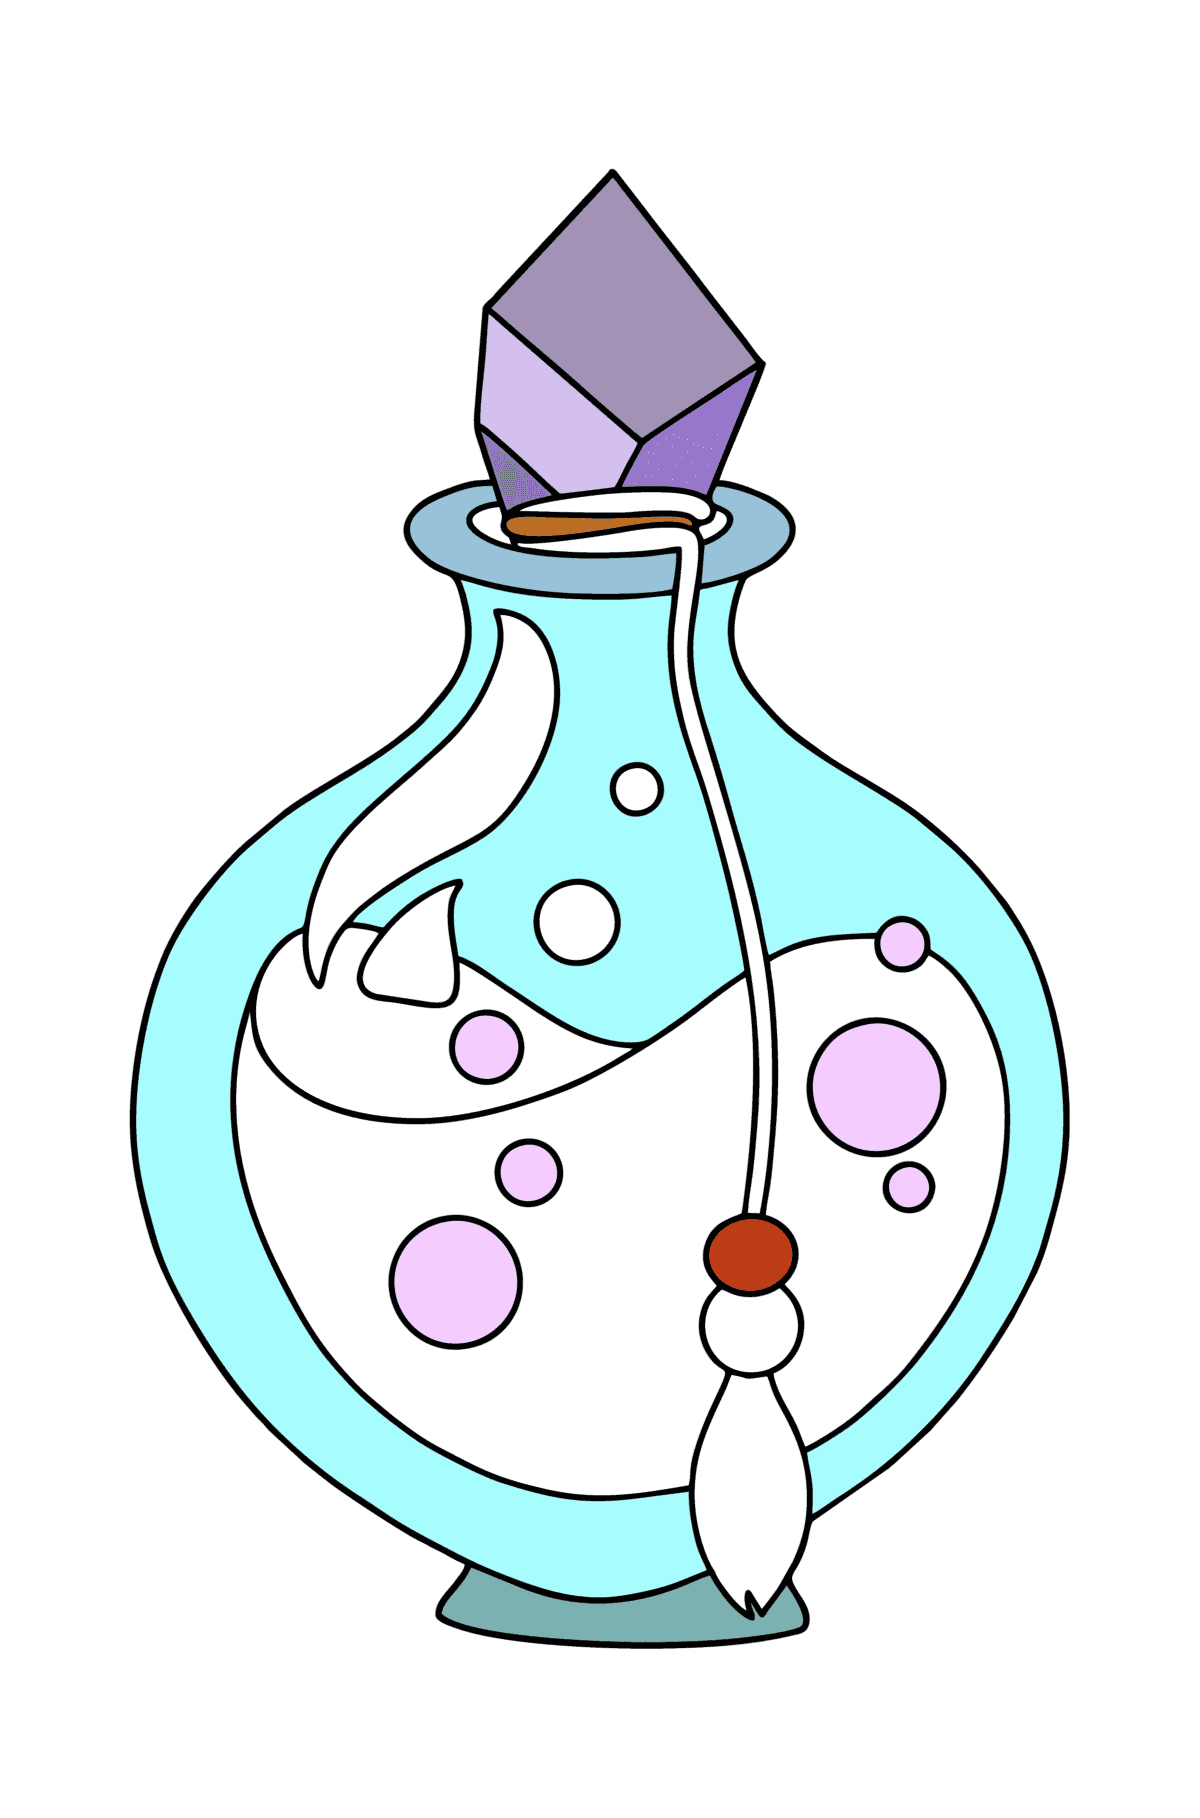 Potion сoloring page - Coloring Pages for Kids